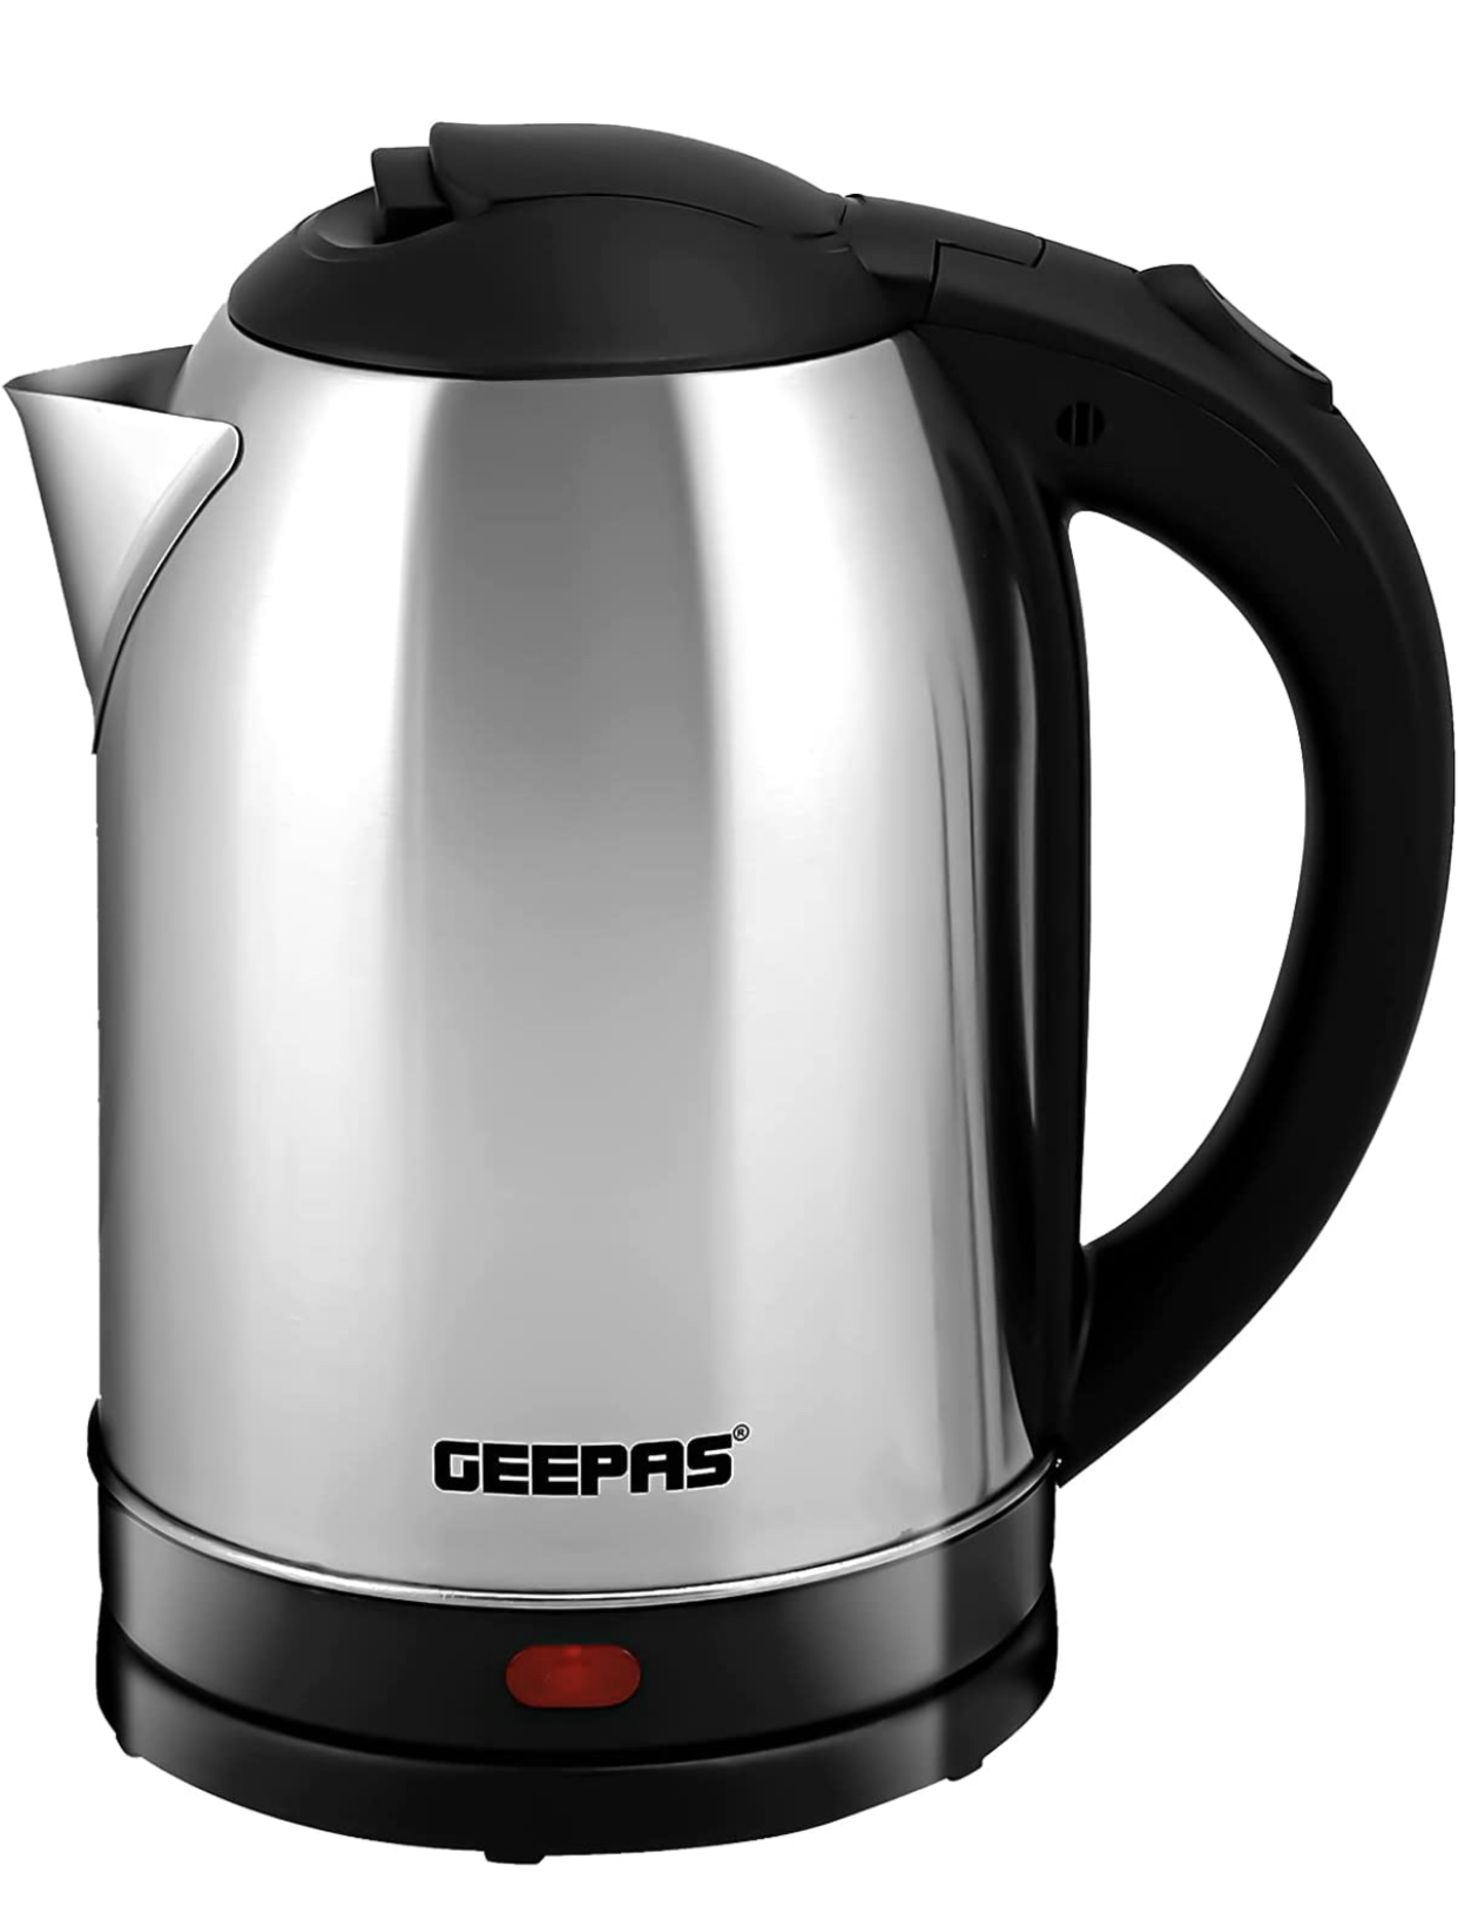 Geepas Stainless Steel Cordless Electric Kettle